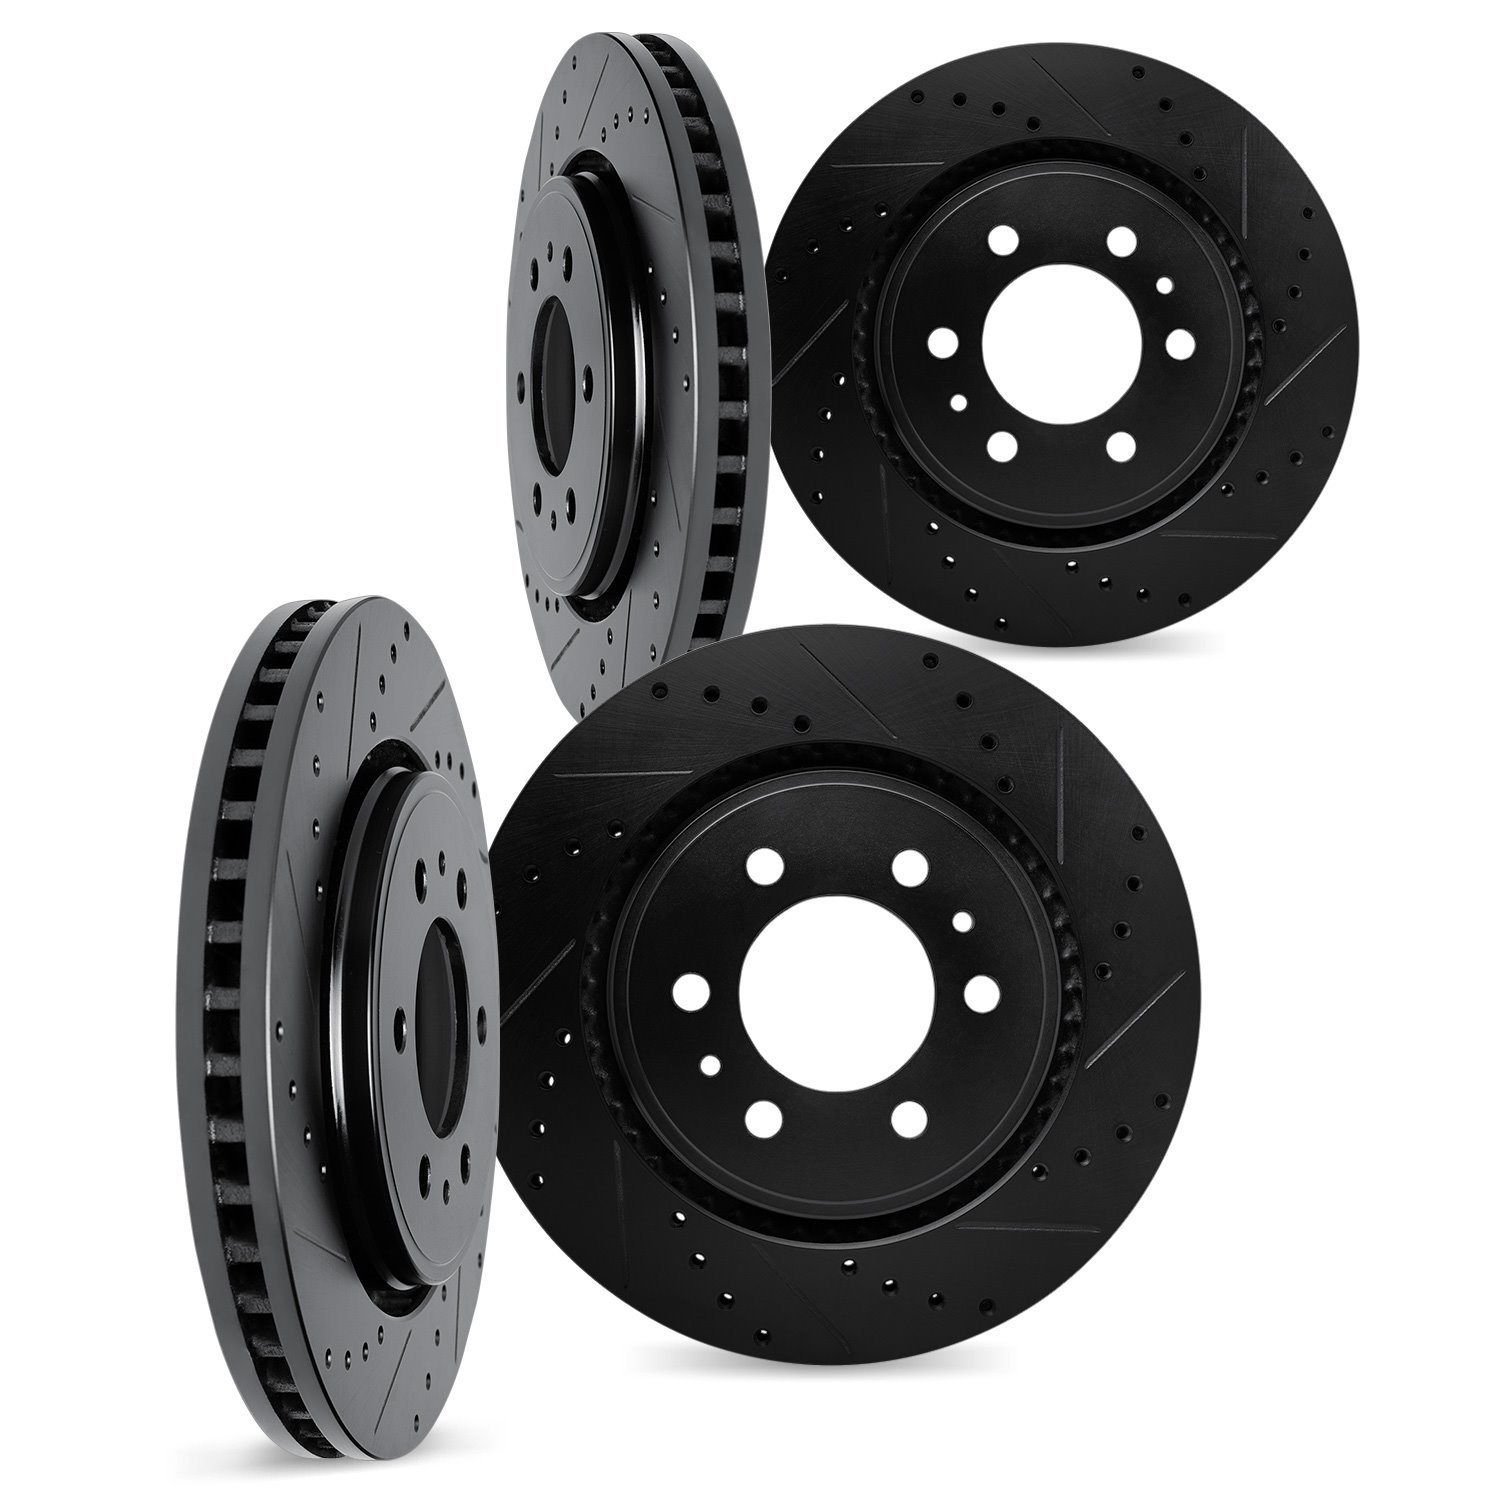 8004-67077 Drilled/Slotted Brake Rotors [Black], Fits Select Multiple Makes/Models, Position: Front and Rear